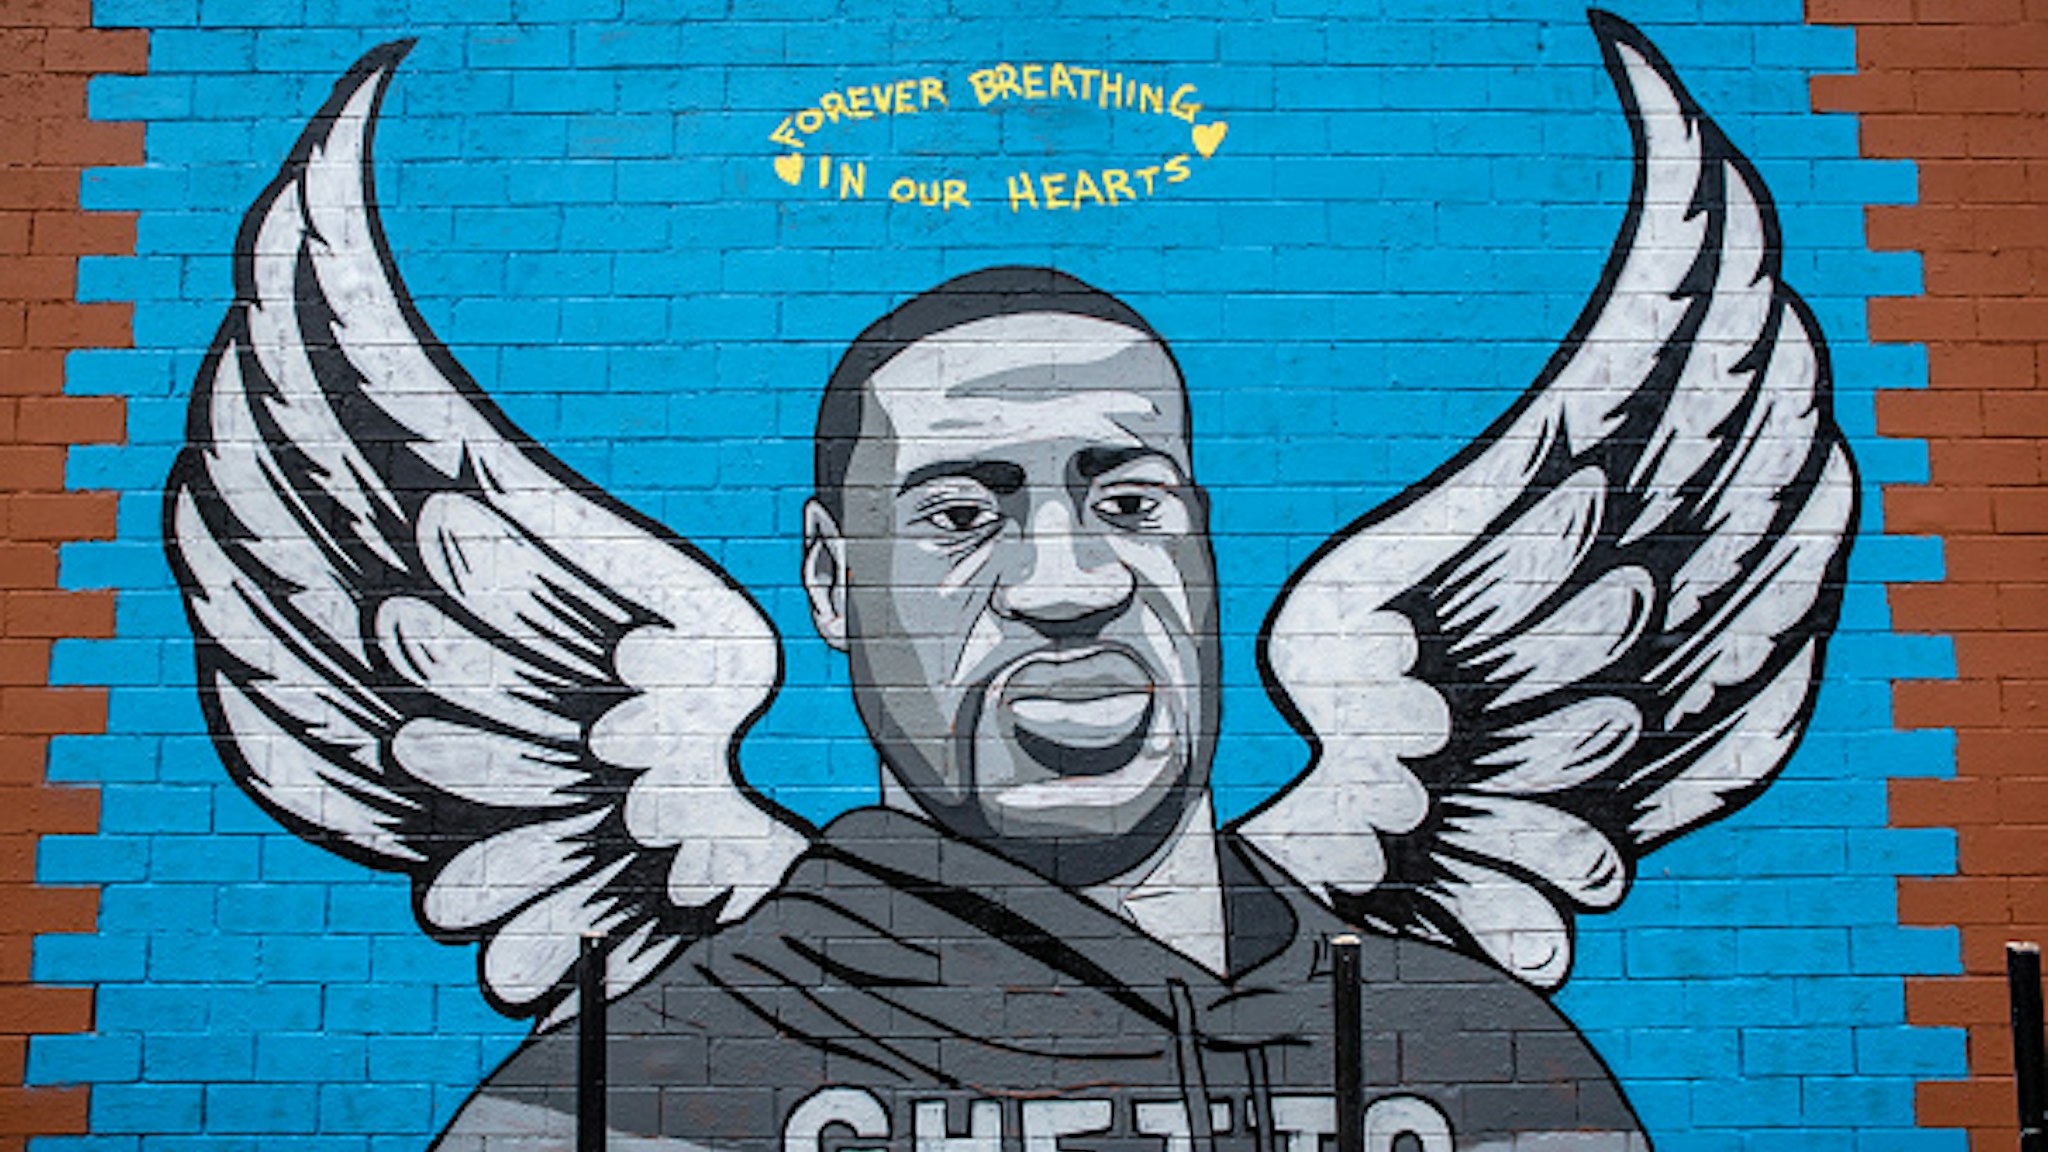 HOUSTON, TX - JUNE 02: A mural of George Floyd is shown painted on the side of Scott Food Mart in the Third Ward before a march in his honor on June 2, 2020 in Houston, Texas. Family members of Floyd were scheduled to participate in a march from Discovery Green to City Hall with support from the local chapter of Black Lives Matter. Floyd, a former resident of the Third Ward, died May 25 while in police custody in Minneapolis, Minnesota.